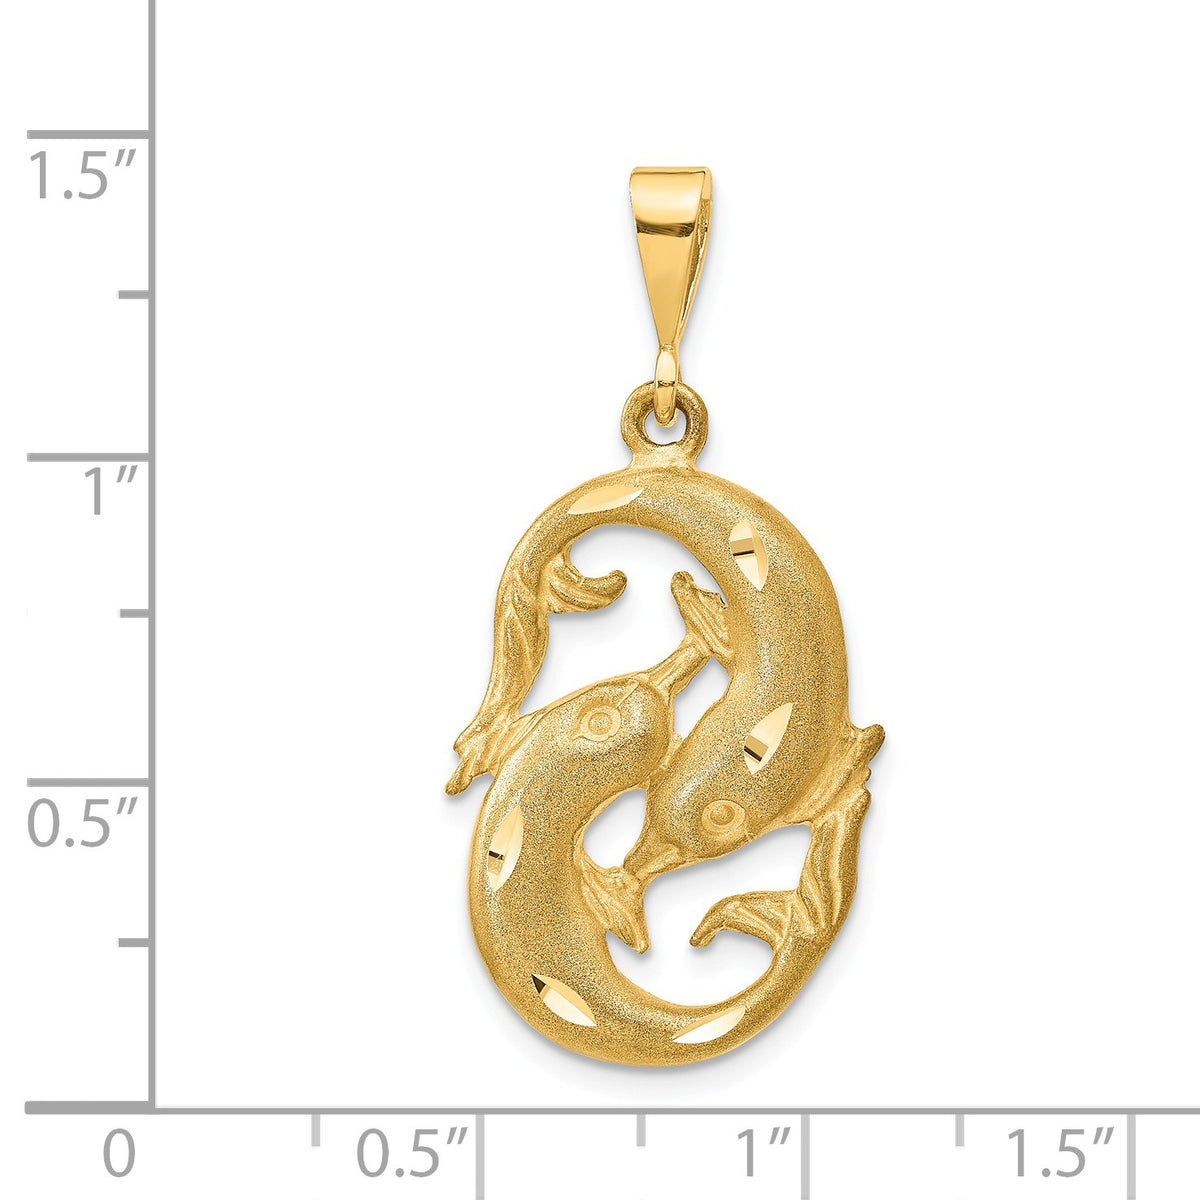 Alternate view of the 14k Yellow Gold Large Pisces the Fish Zodiac Pendant by The Black Bow Jewelry Co.